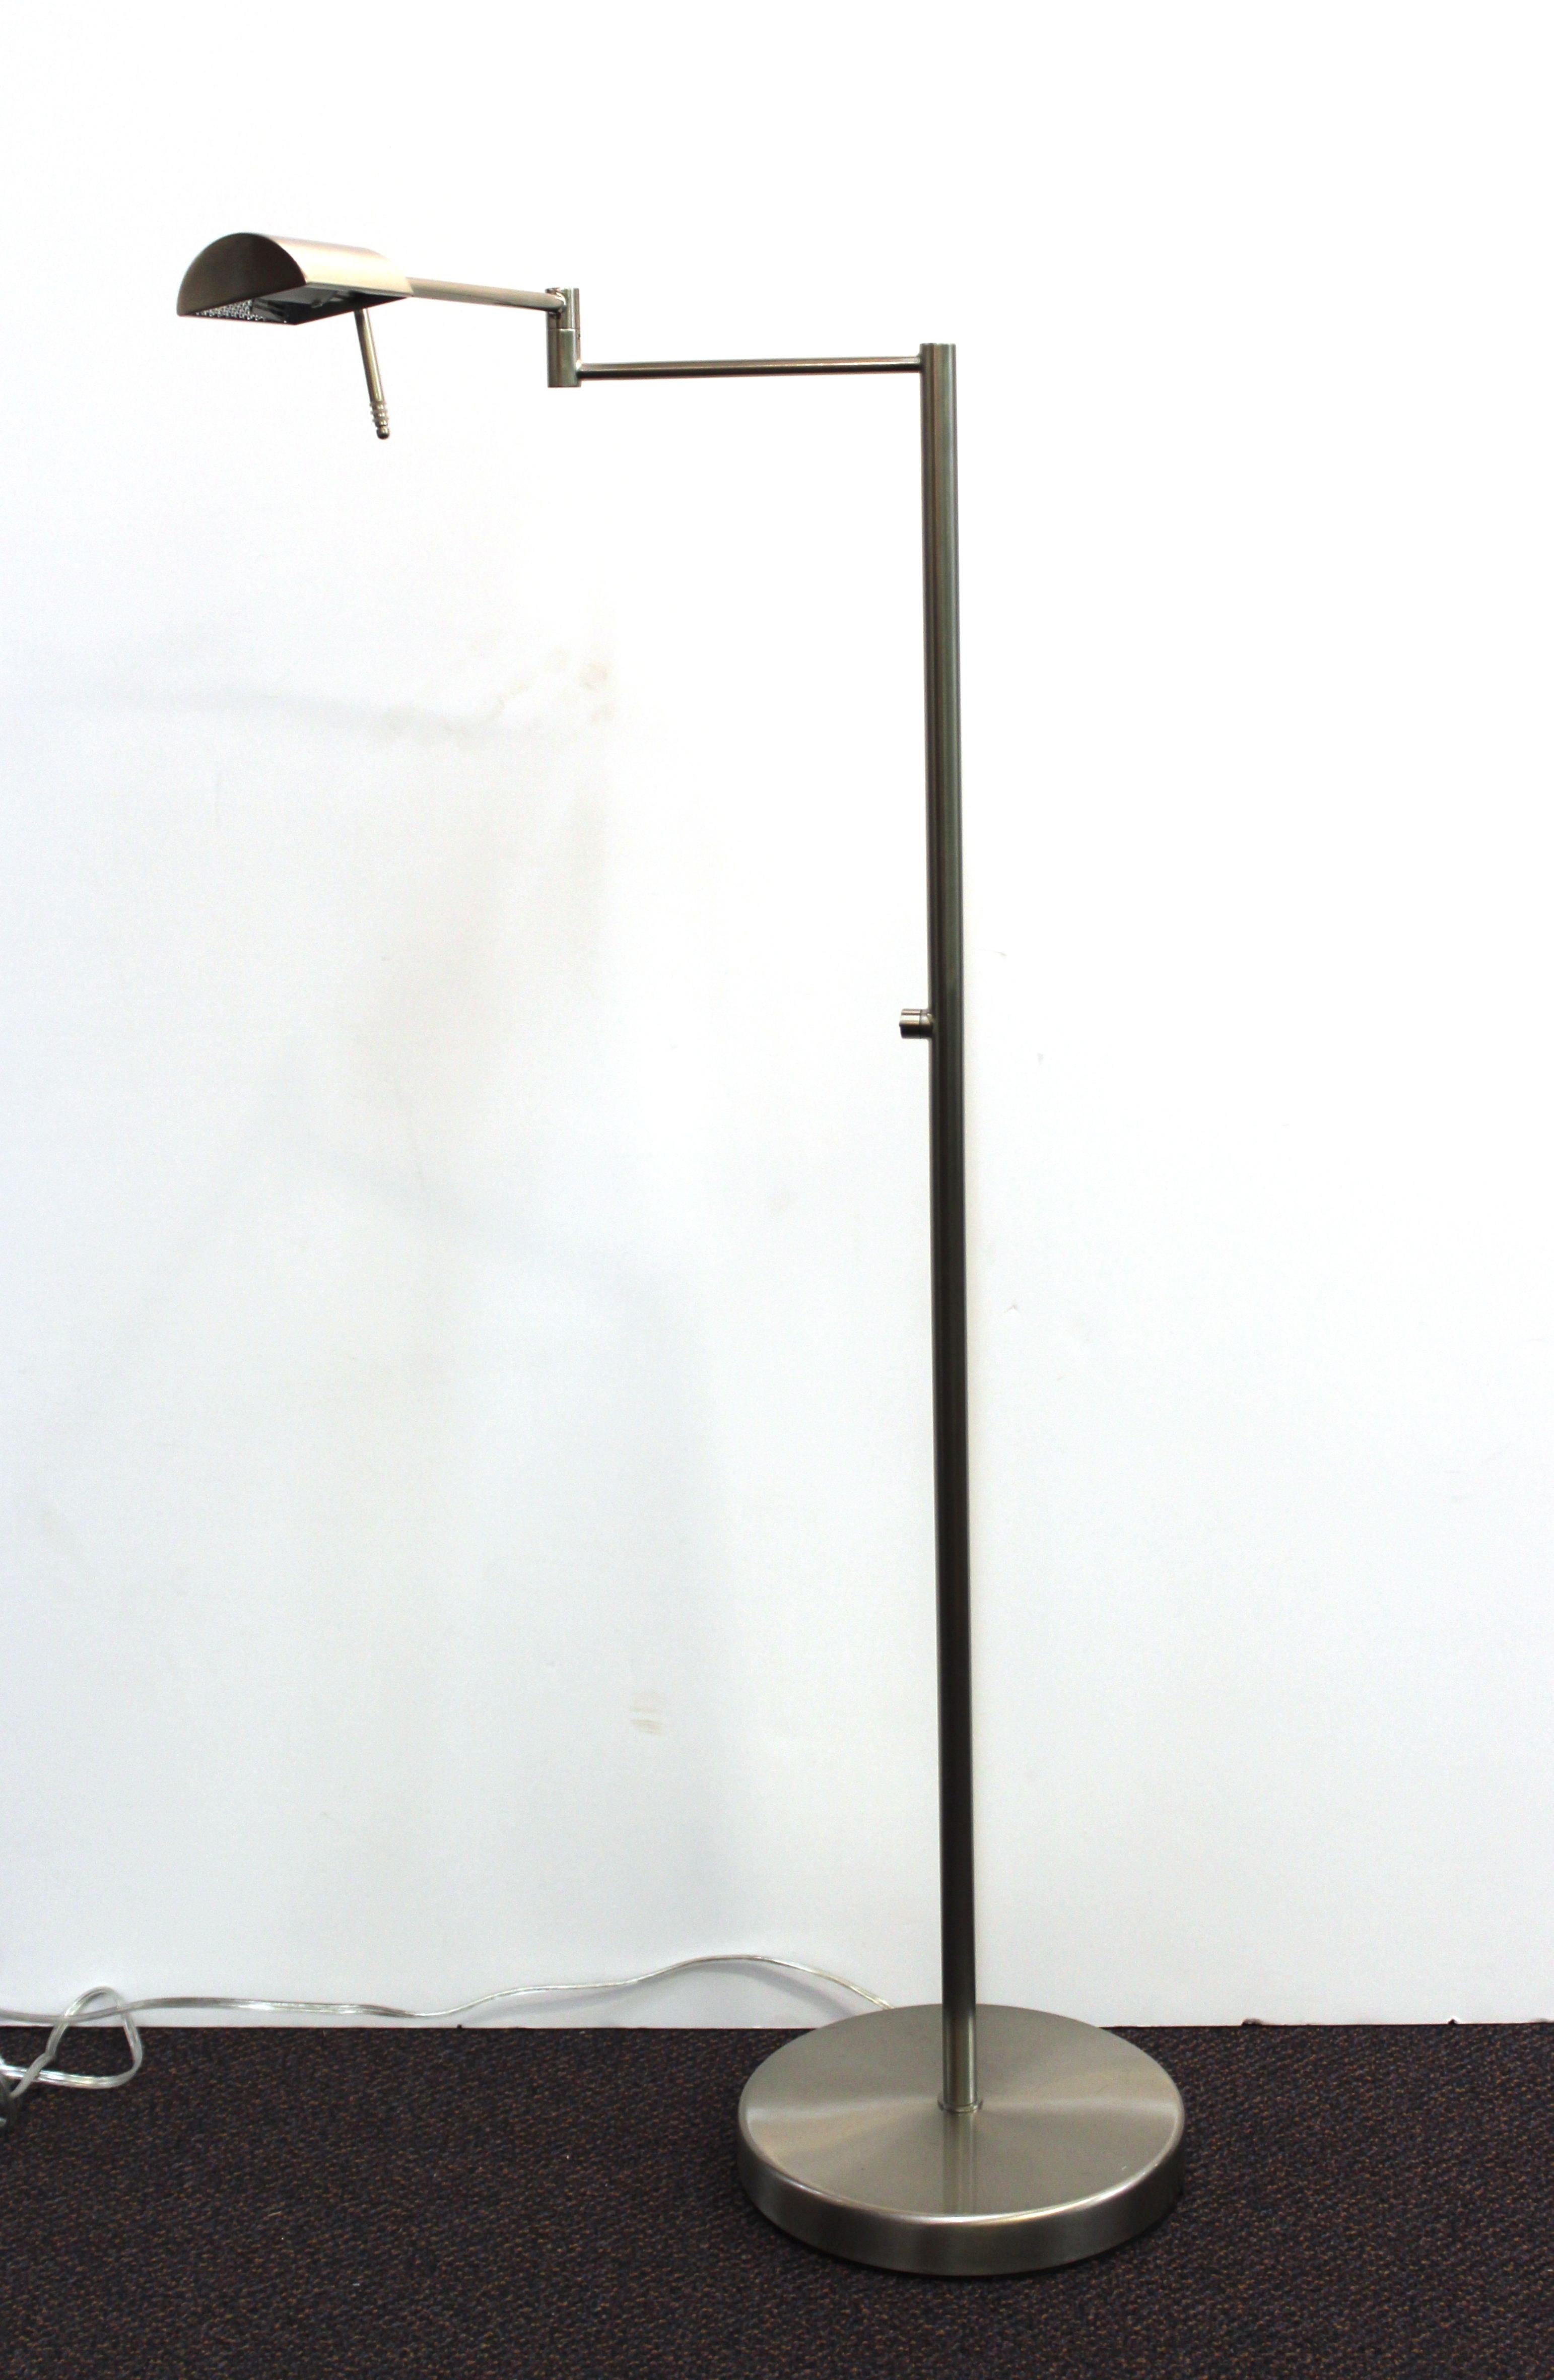 Modern Minimalist pair of floor lamps or reading lamps in metal, both with adjustable arms and heads, made by Sonneman. The pair is in great vintage condition, with one of the lamps missing the glass cover for the bulb.